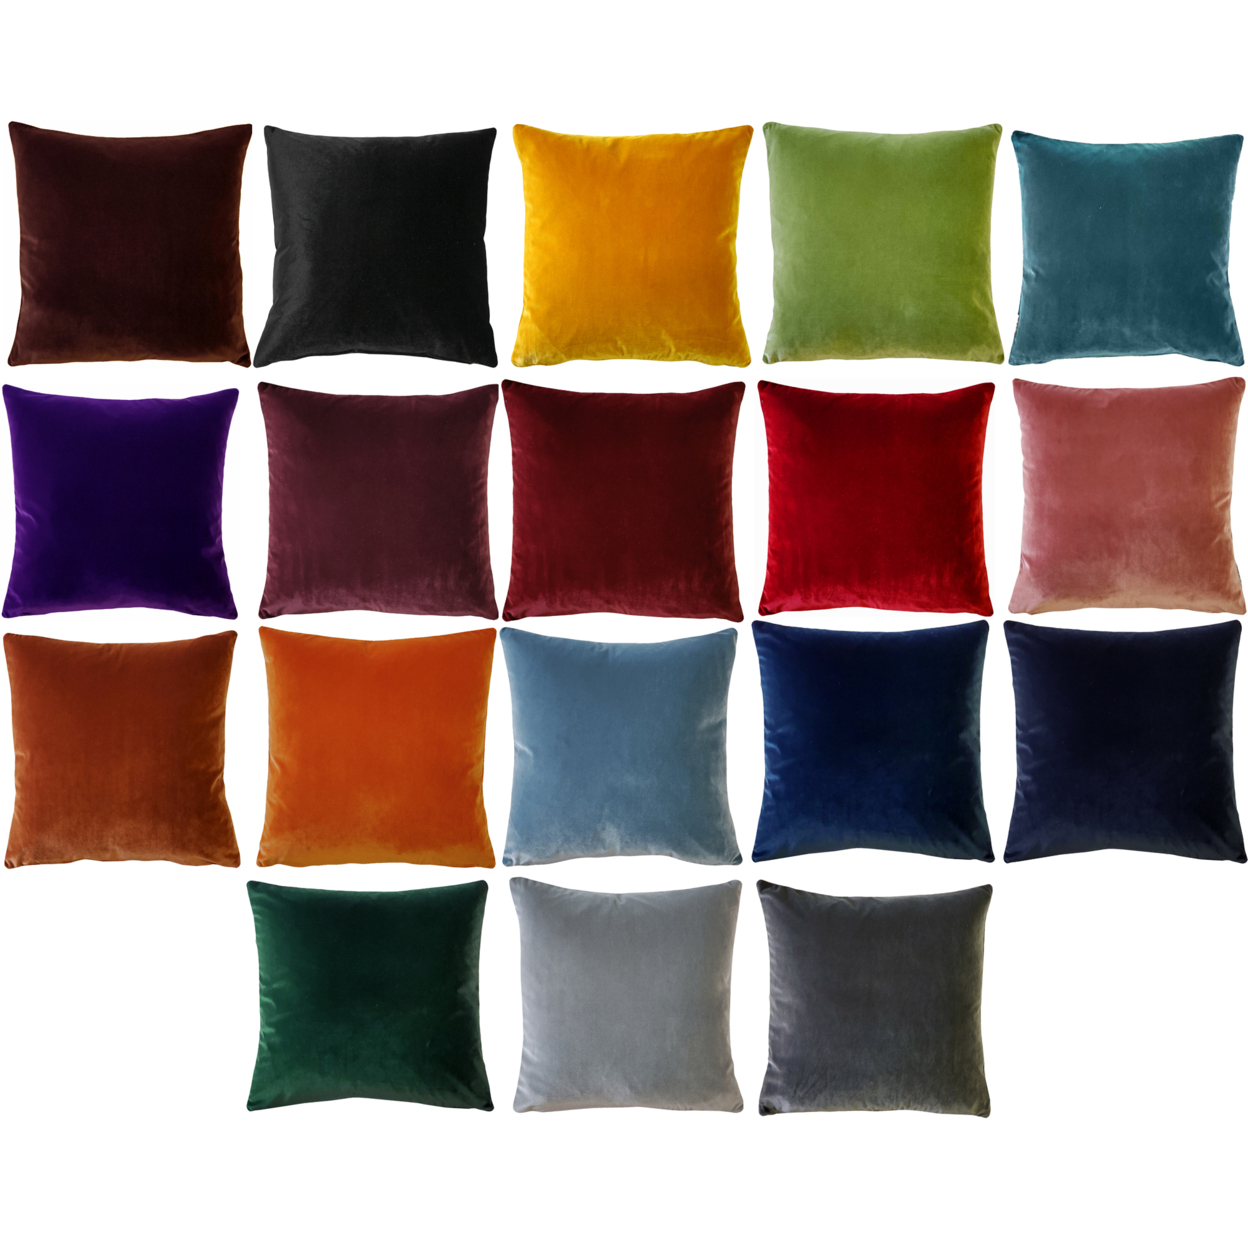 Castello Velvet Throw Pillows, Complete Pillow With Polyfill Pillow Insert (18 Colors, 3 Sizes) - Royal Blue, 12x20